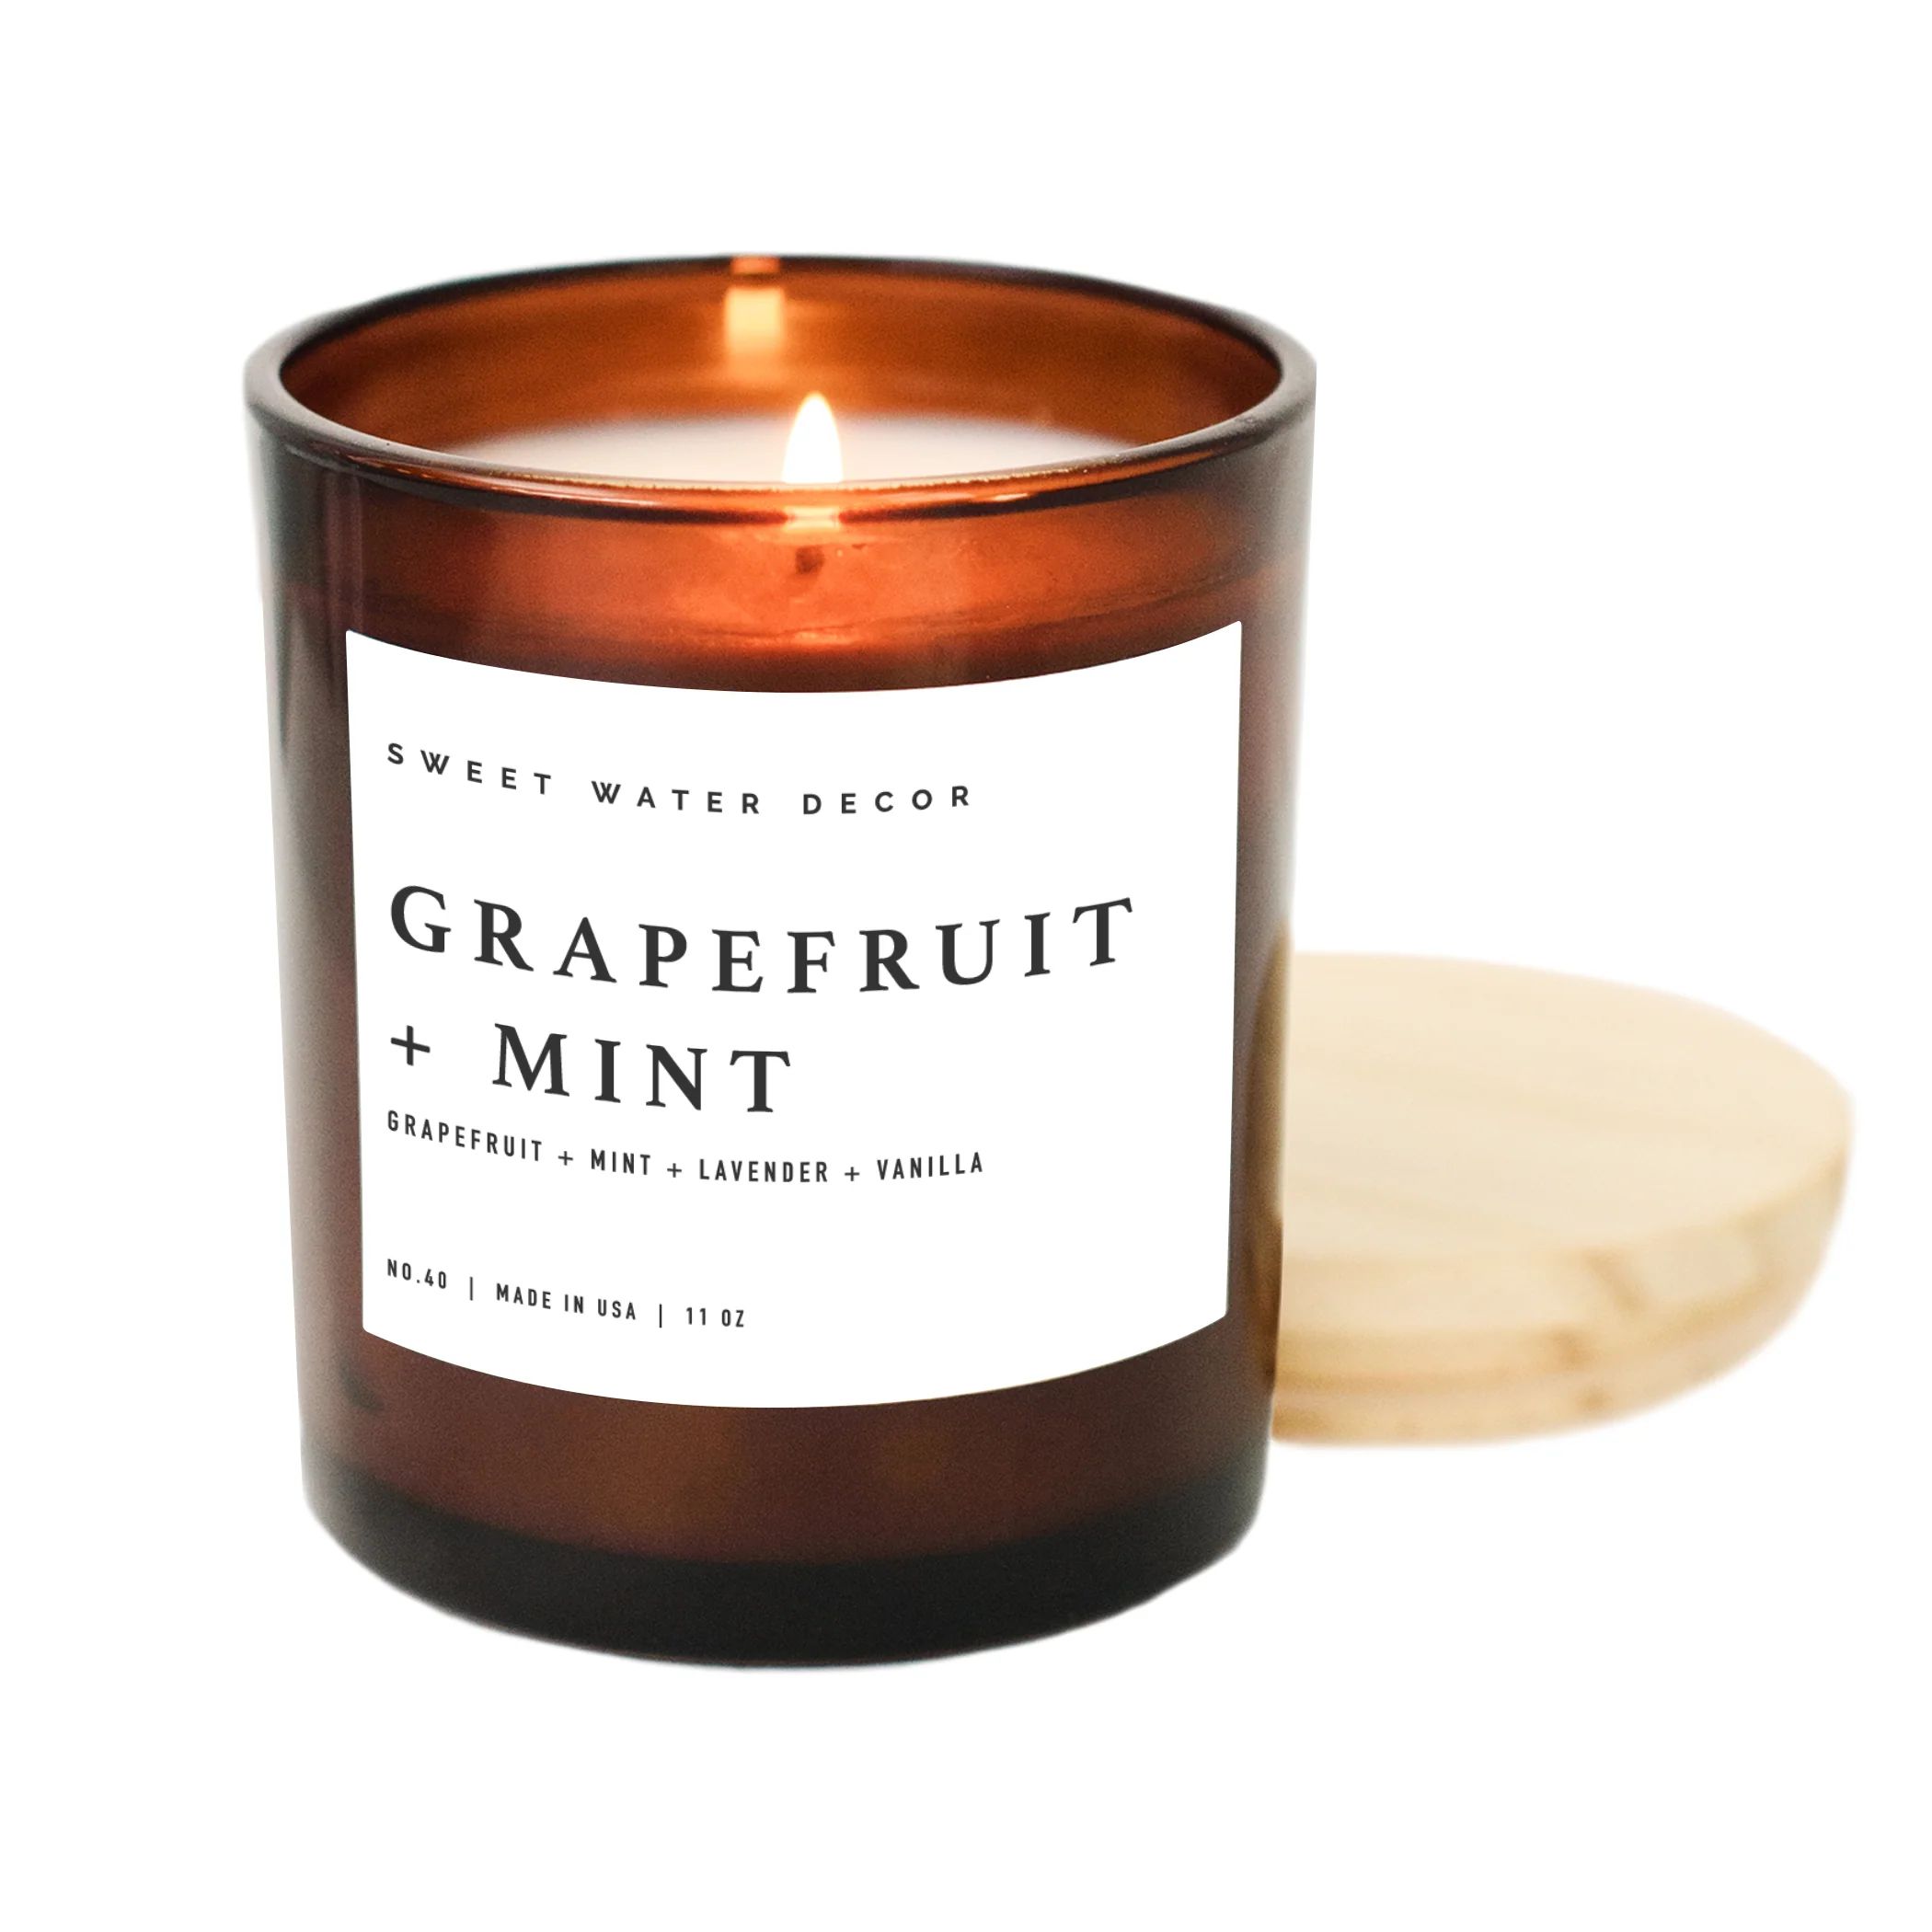 Grapefruit + Mint Soy Candle | 11 oz Amber Candle | Sweet Water Decor, LLC